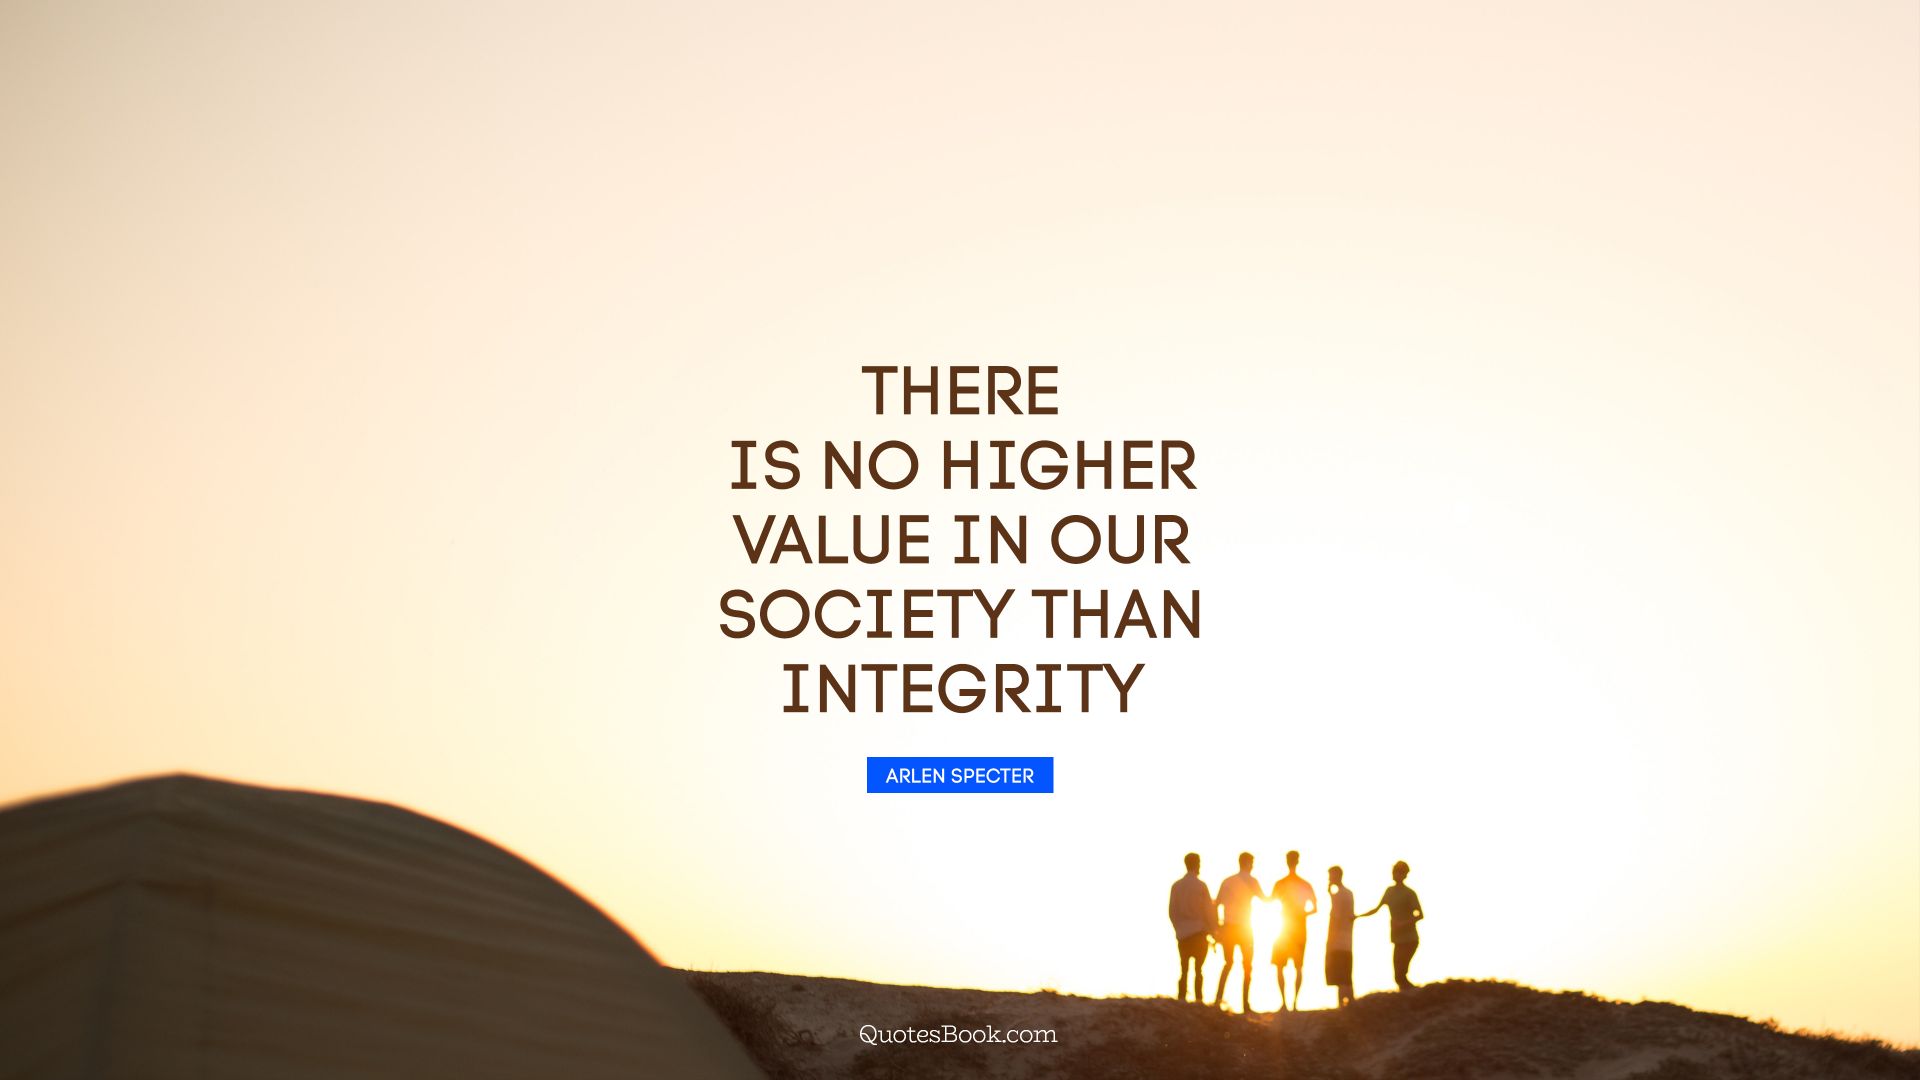 There is no higher value in our society than integrity. - Quote by Arlen Specter